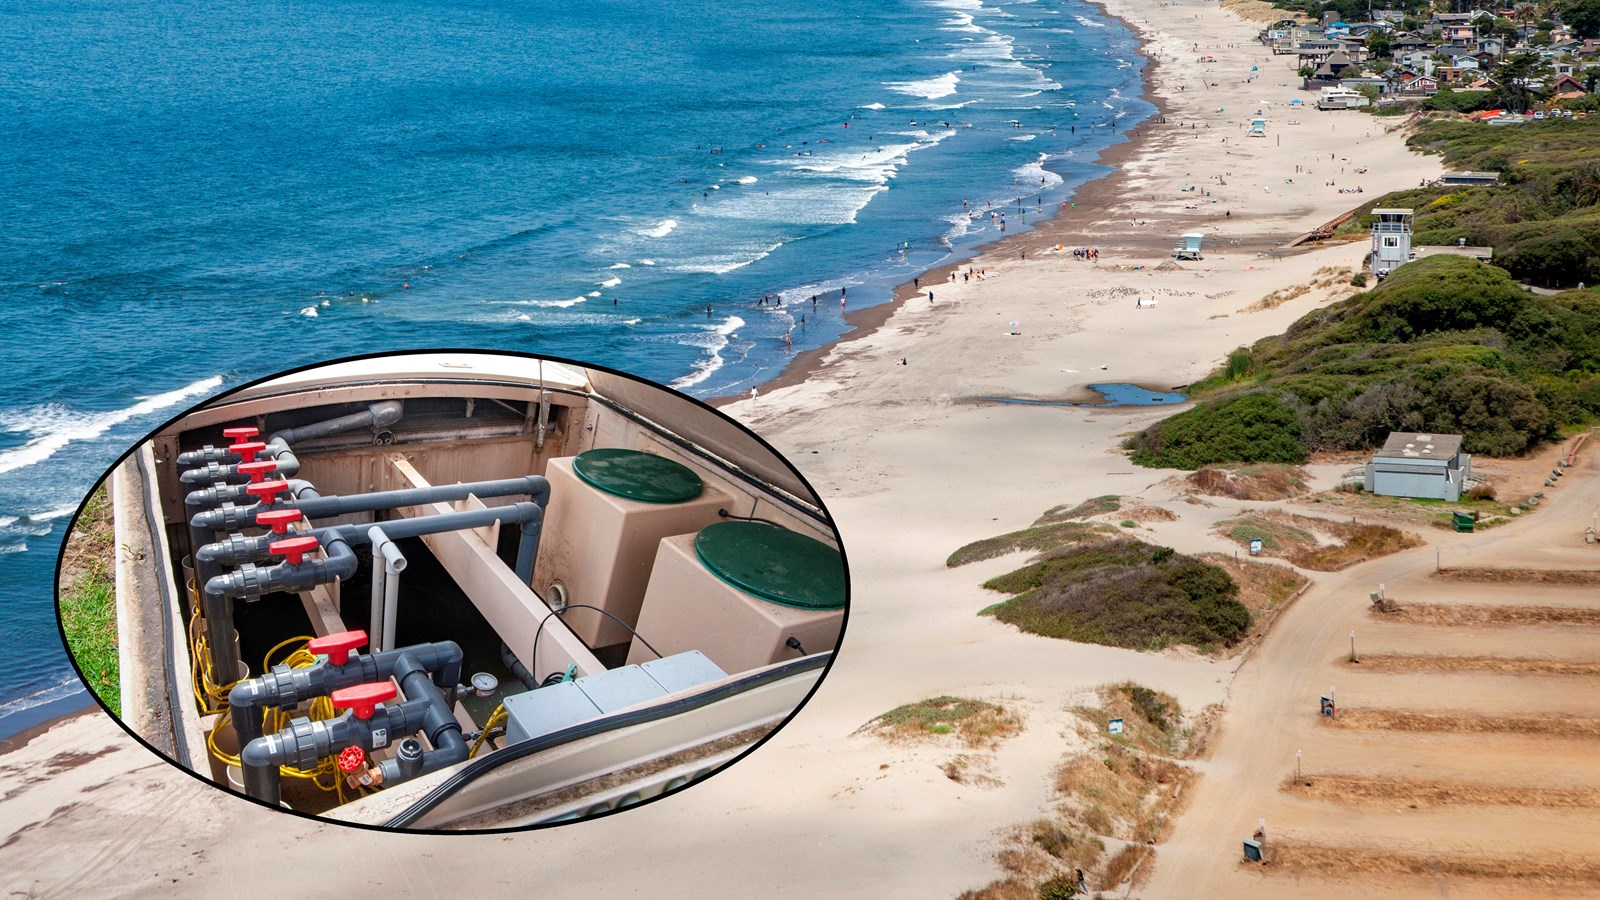 Colored image of Stinson Beach with an inset image of the wastewater treatment system